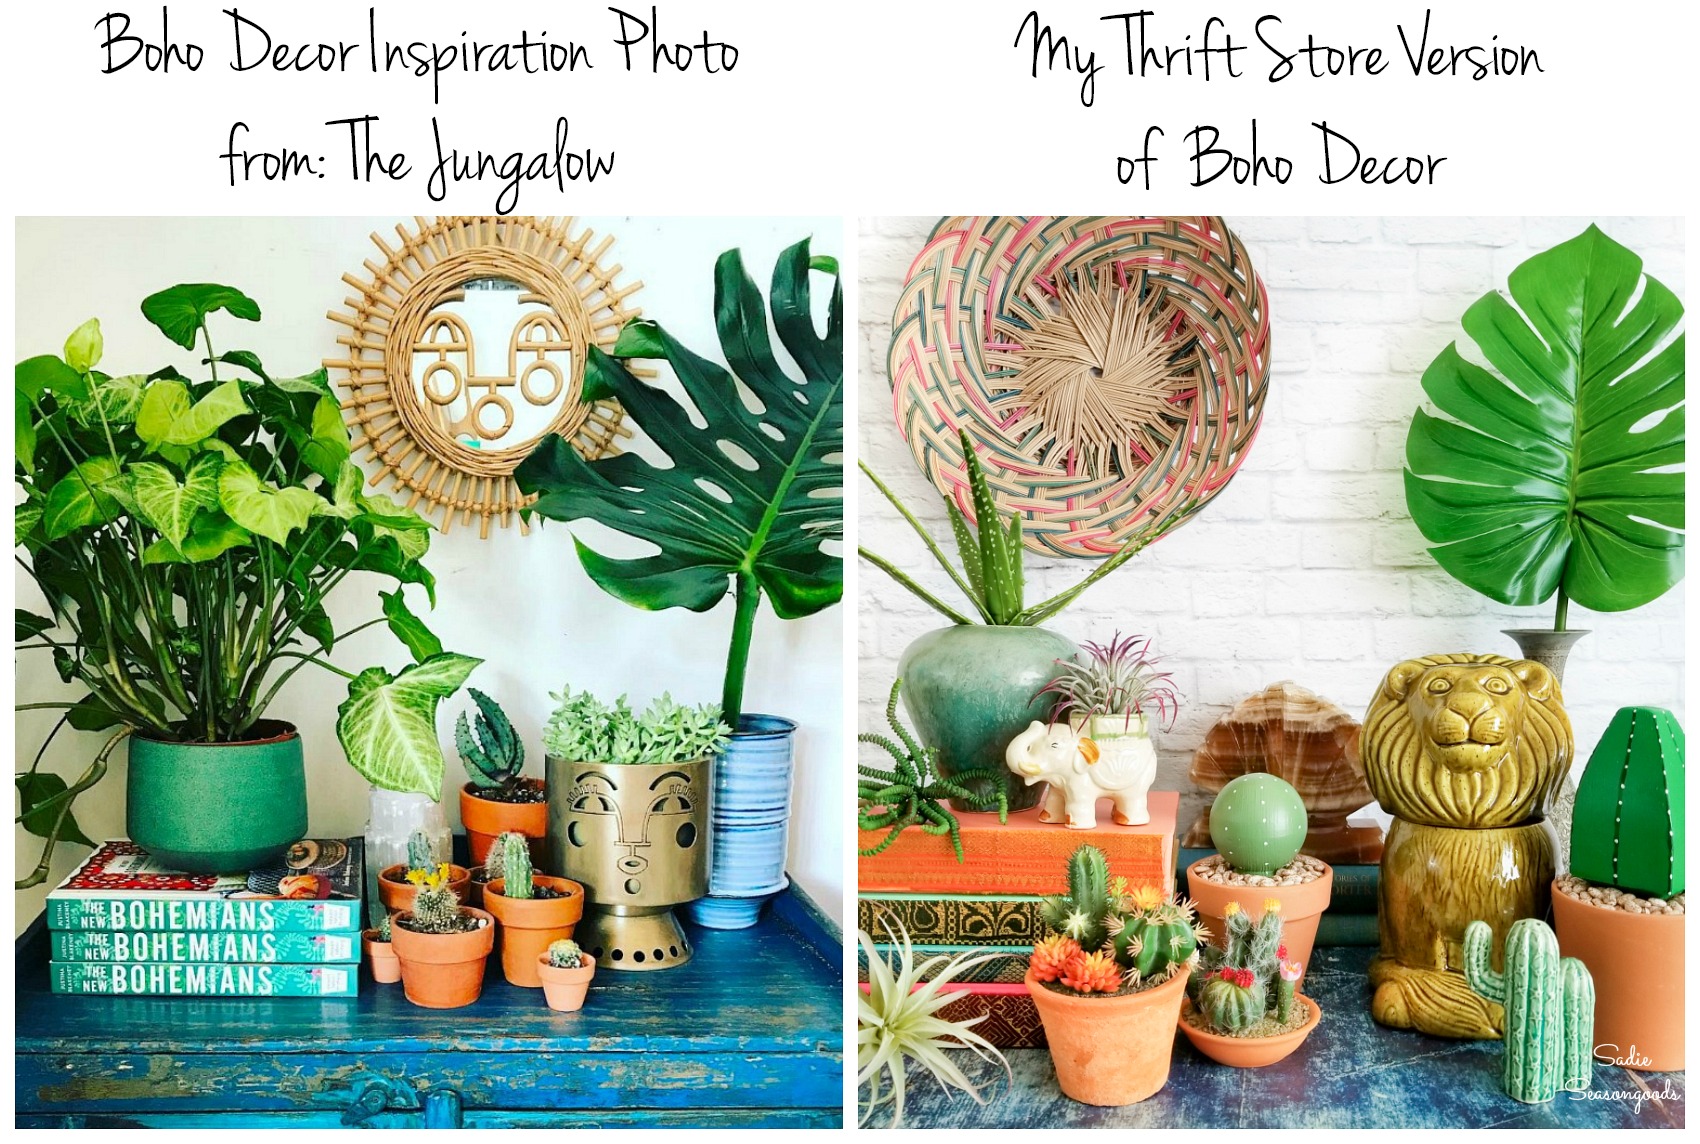 Boho Decor by The Jungalow and a version with thrift store decor